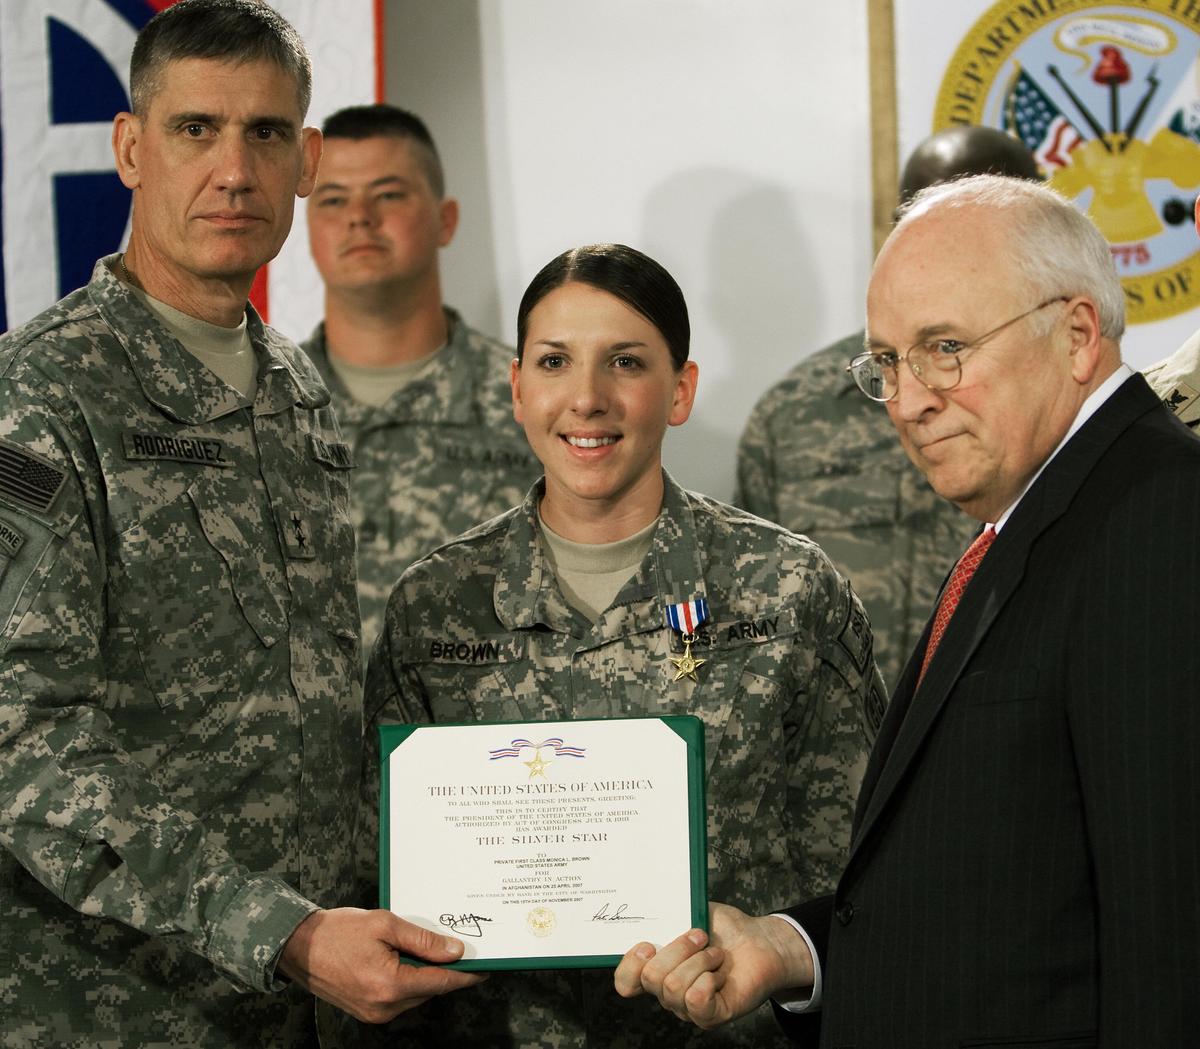 Former Vice President Dick Cheney presents Specialist Monica Lin Brown with the Silver Star. (PAUL J. RICHARDS/AFP via Getty Images)